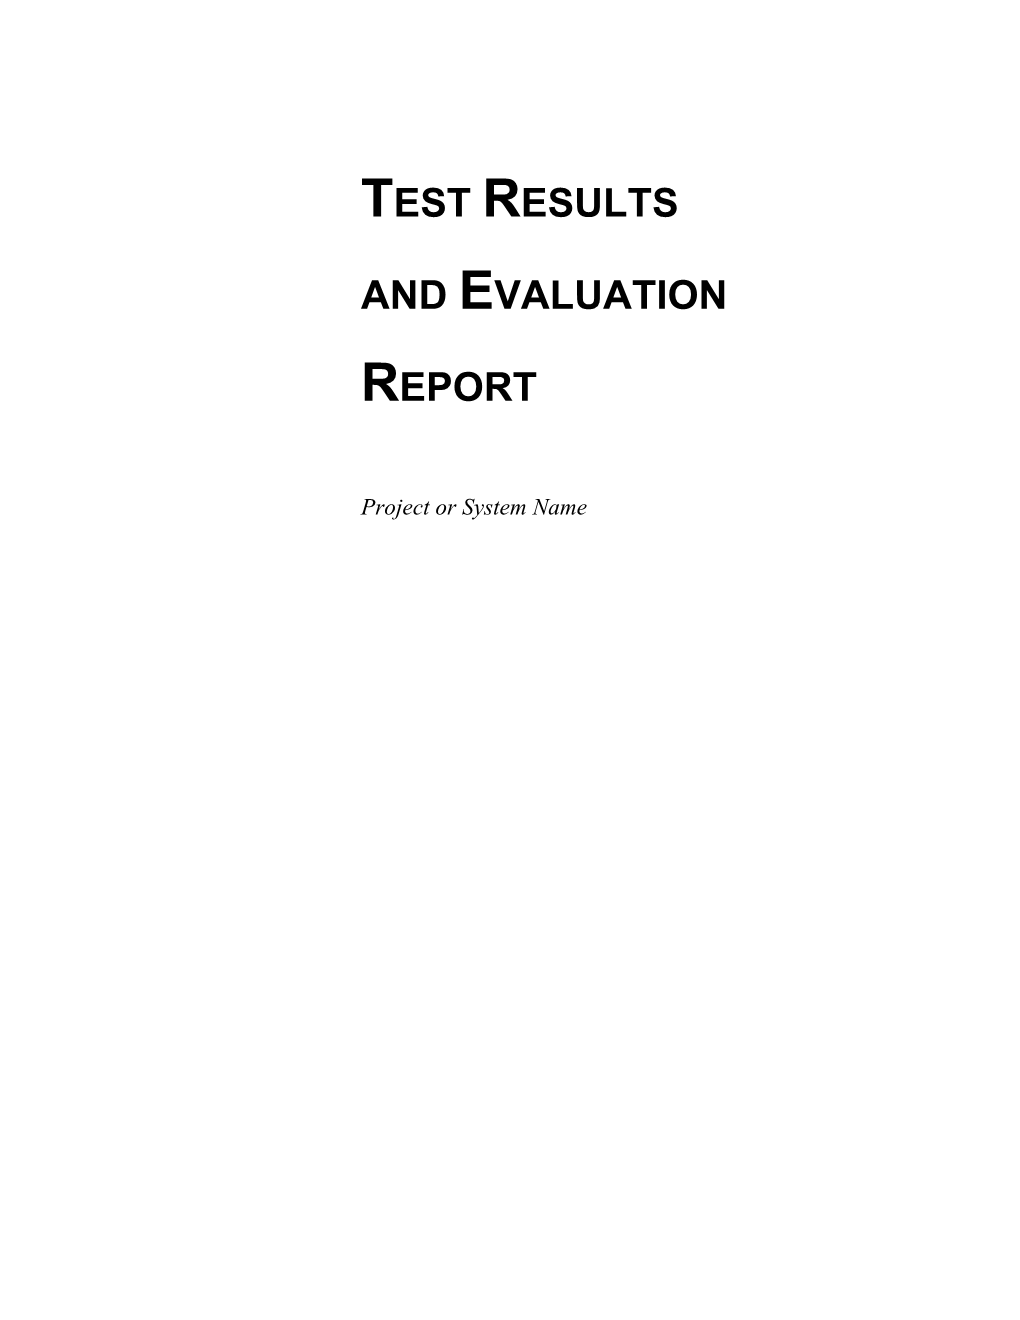 Test Resutls and Evaluation Report Template